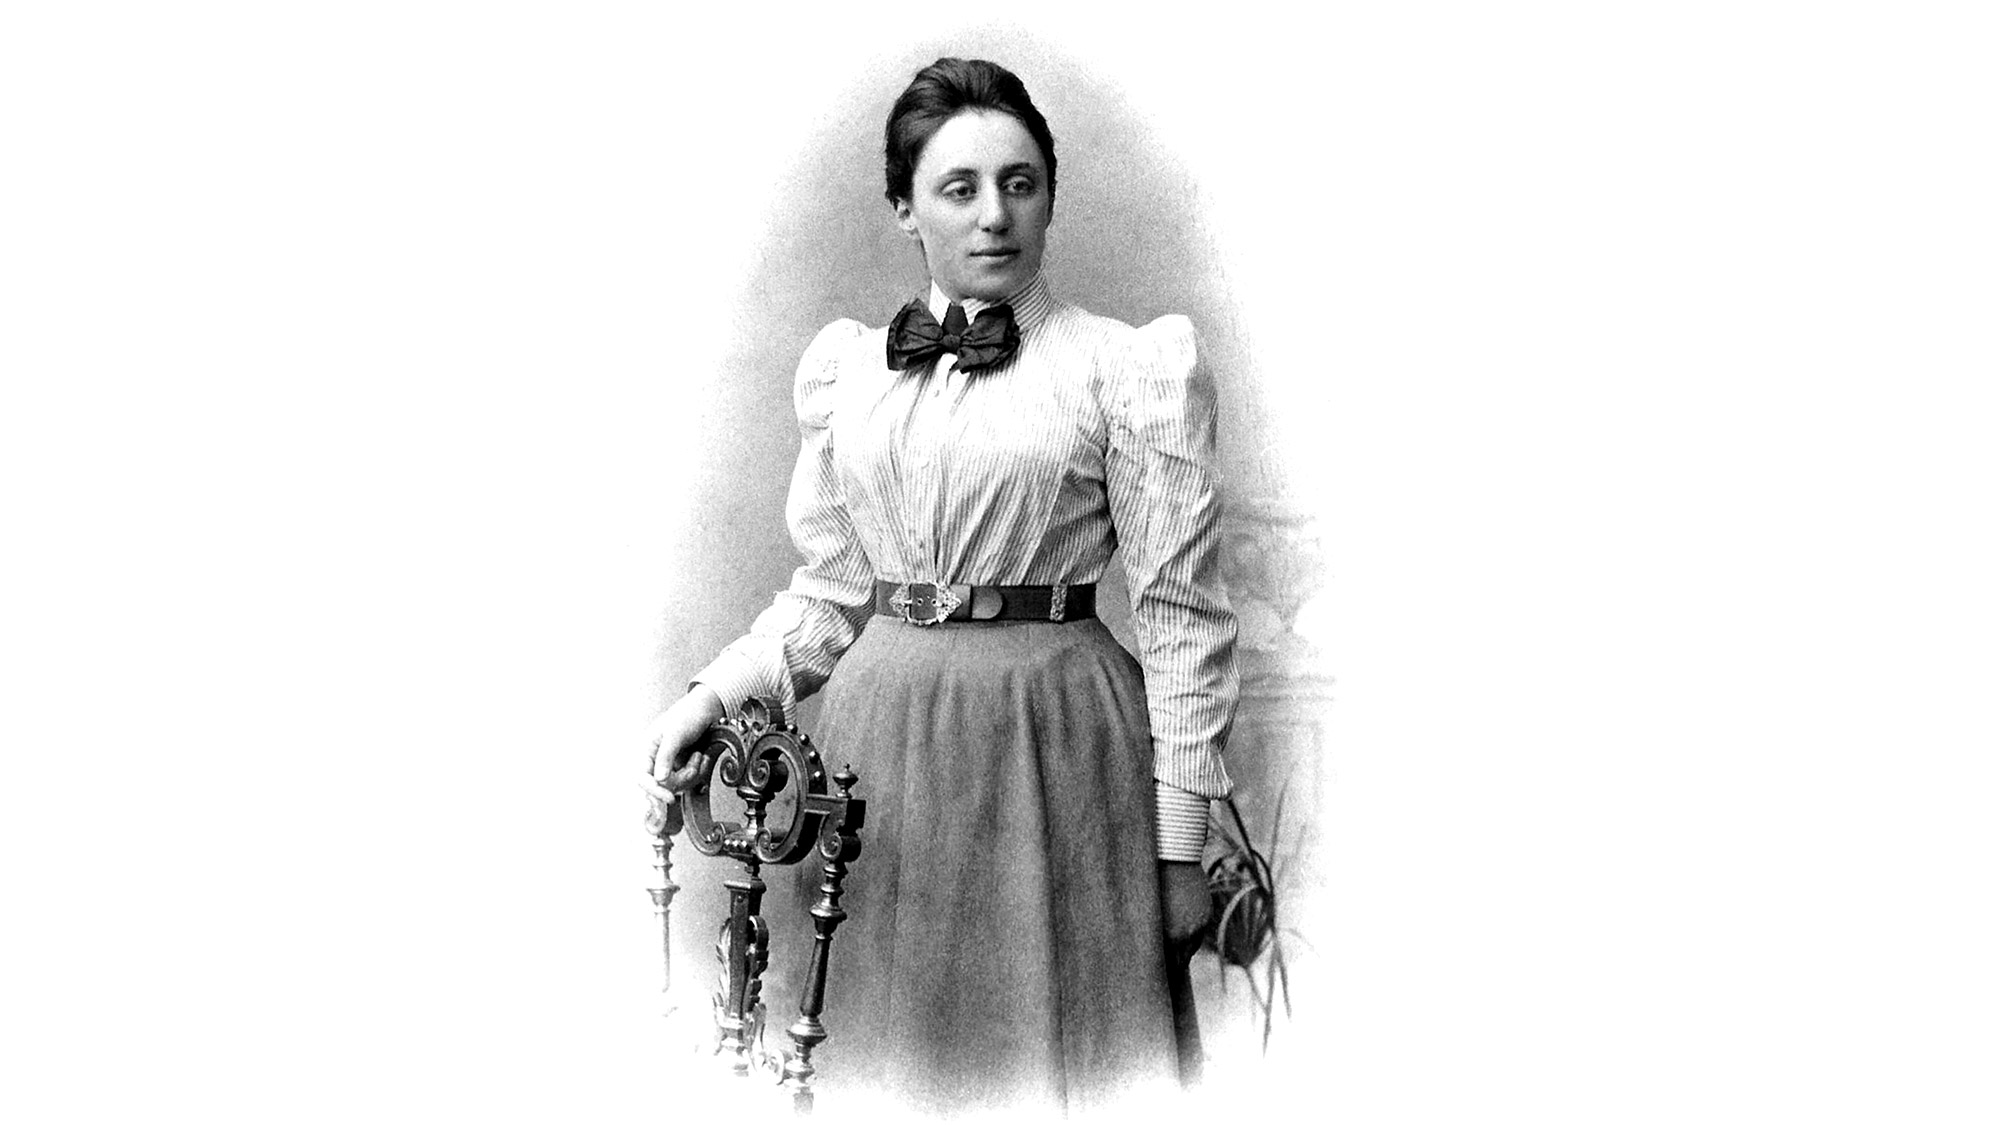 EMMY NOETHER (1882-1935) German mathematician, about 1905